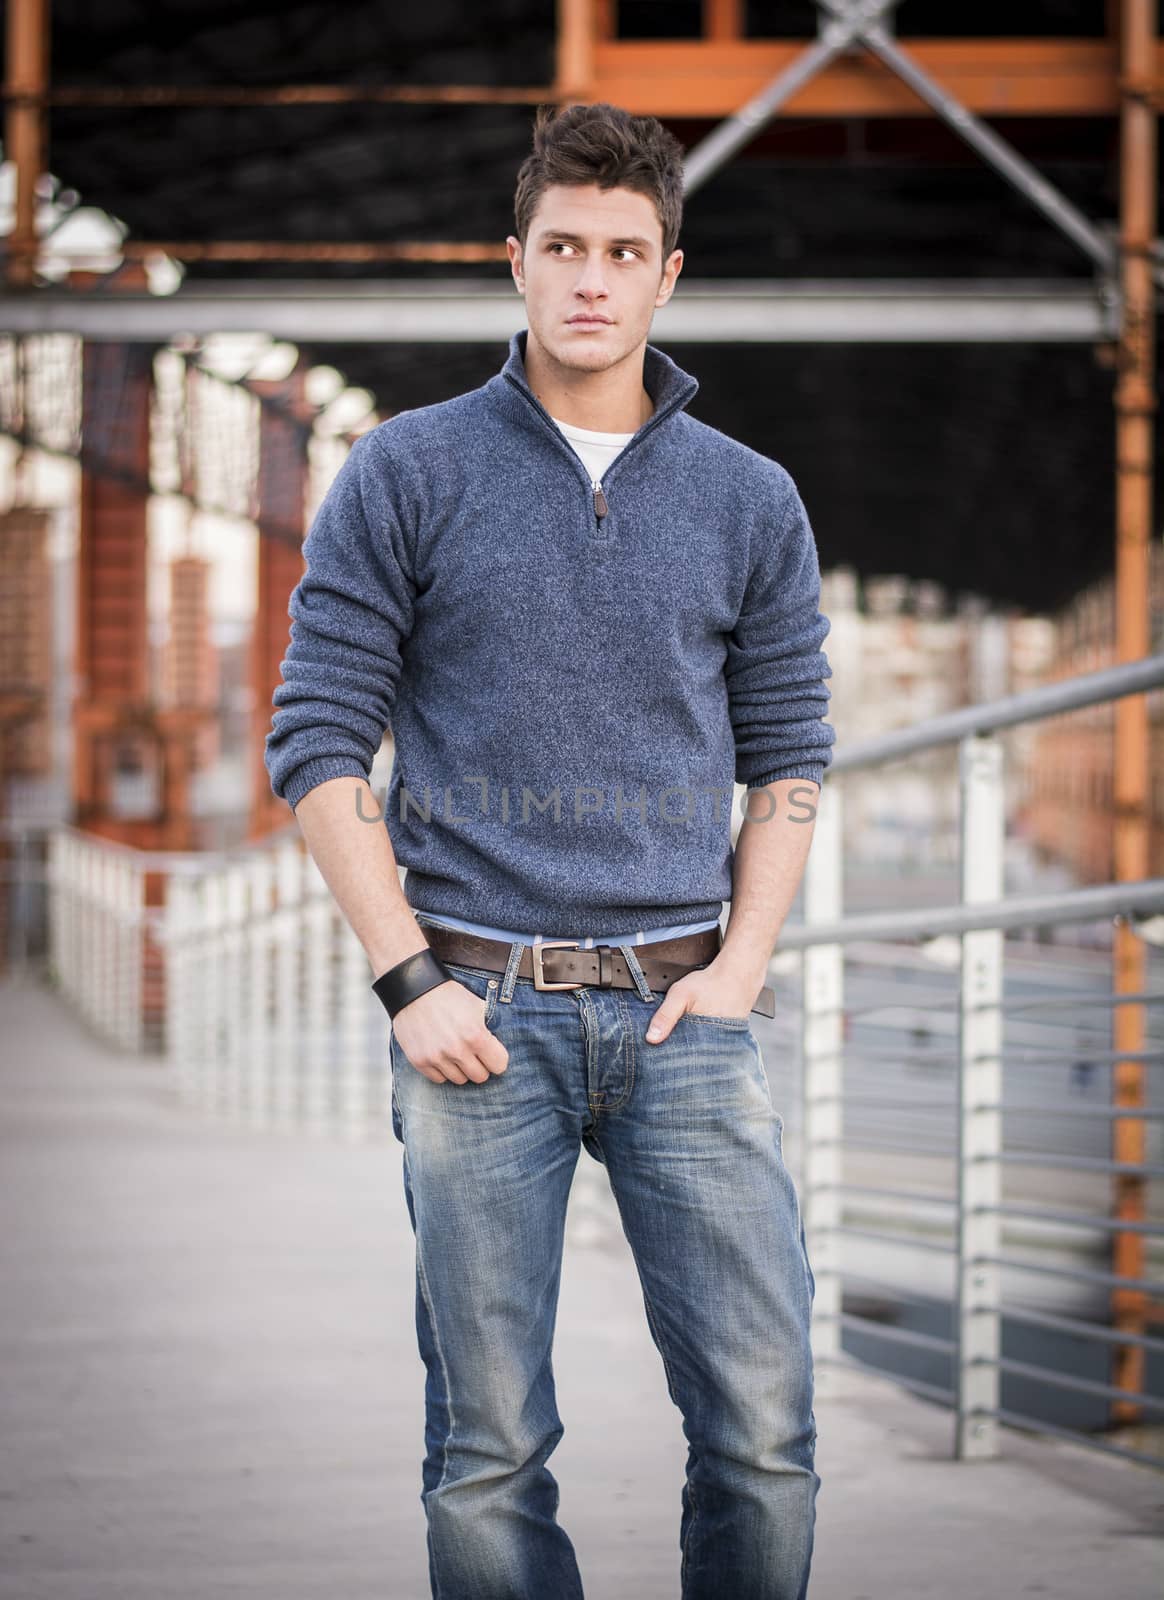 Handsome young man in industrial environment by artofphoto